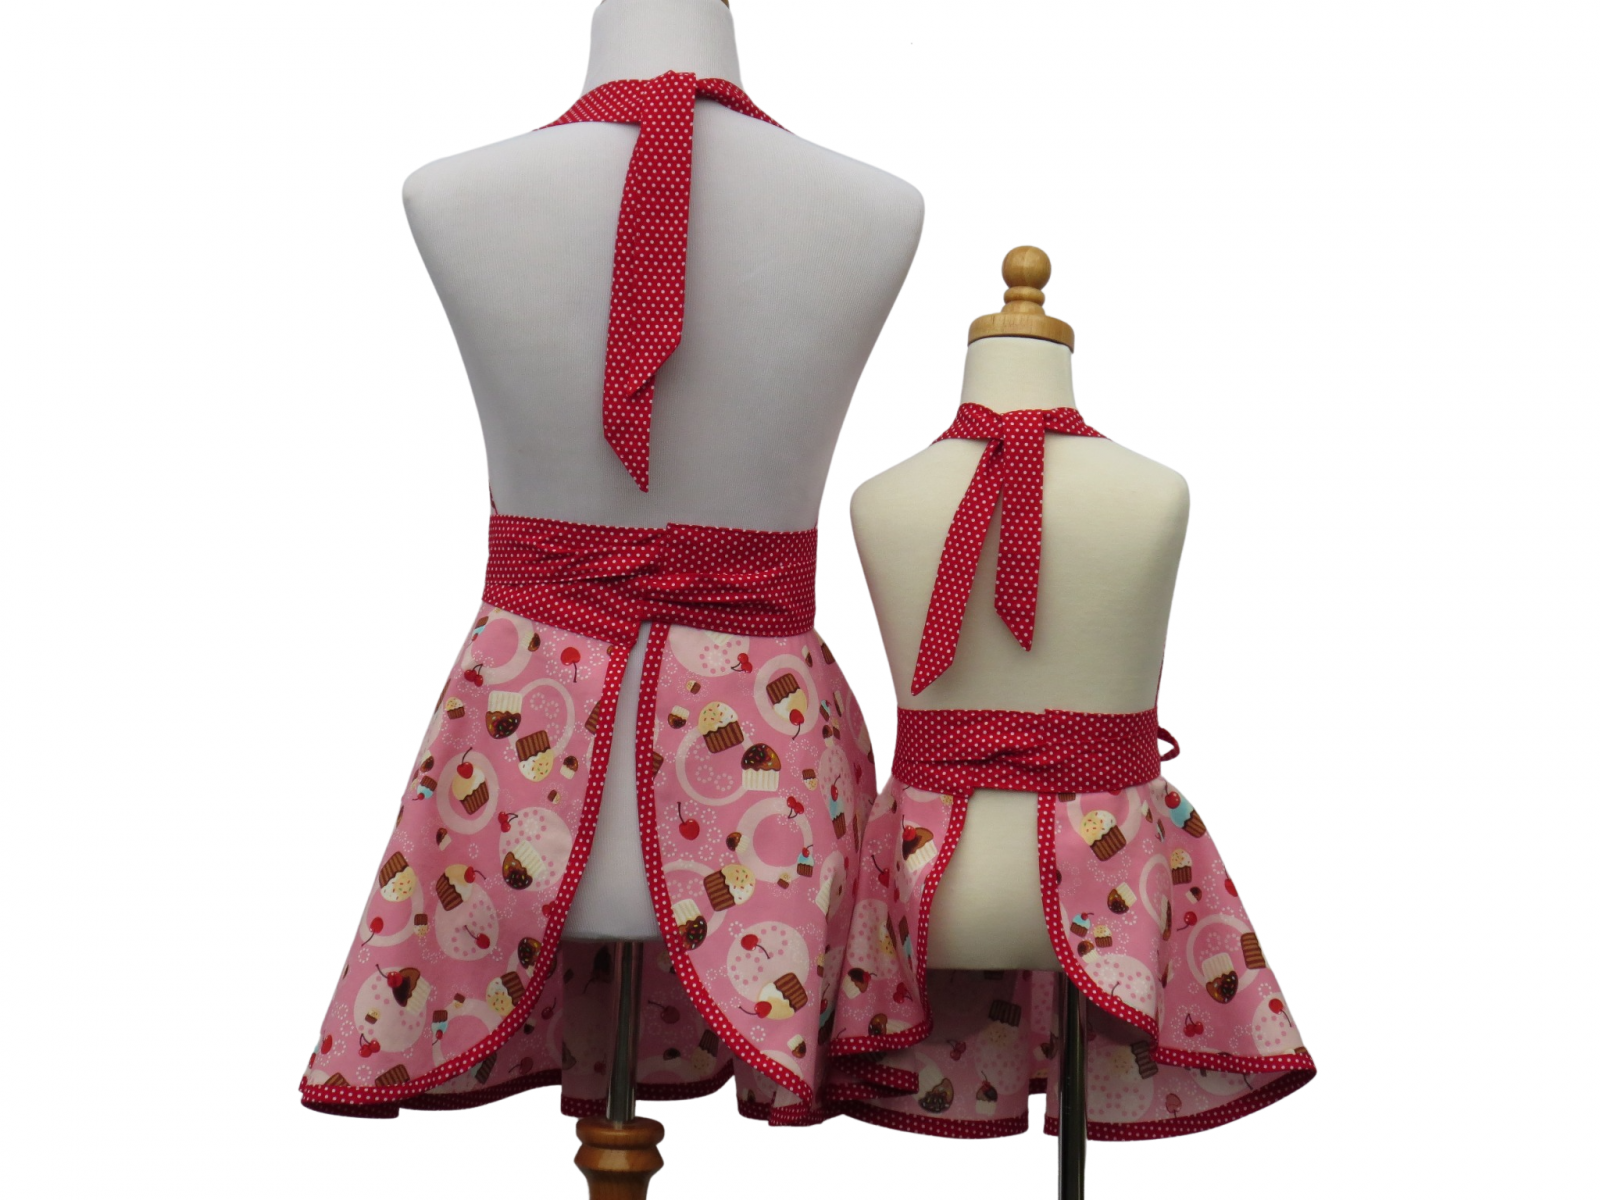 https://www.stitchedbybeverly.com/sites/stitchedbybeverly.indiemade.com/files/imagecache/im_clientsite_product_zoom/mother_daughter_pink_cupcake_aprons_back_view_tied_in_front.jpg